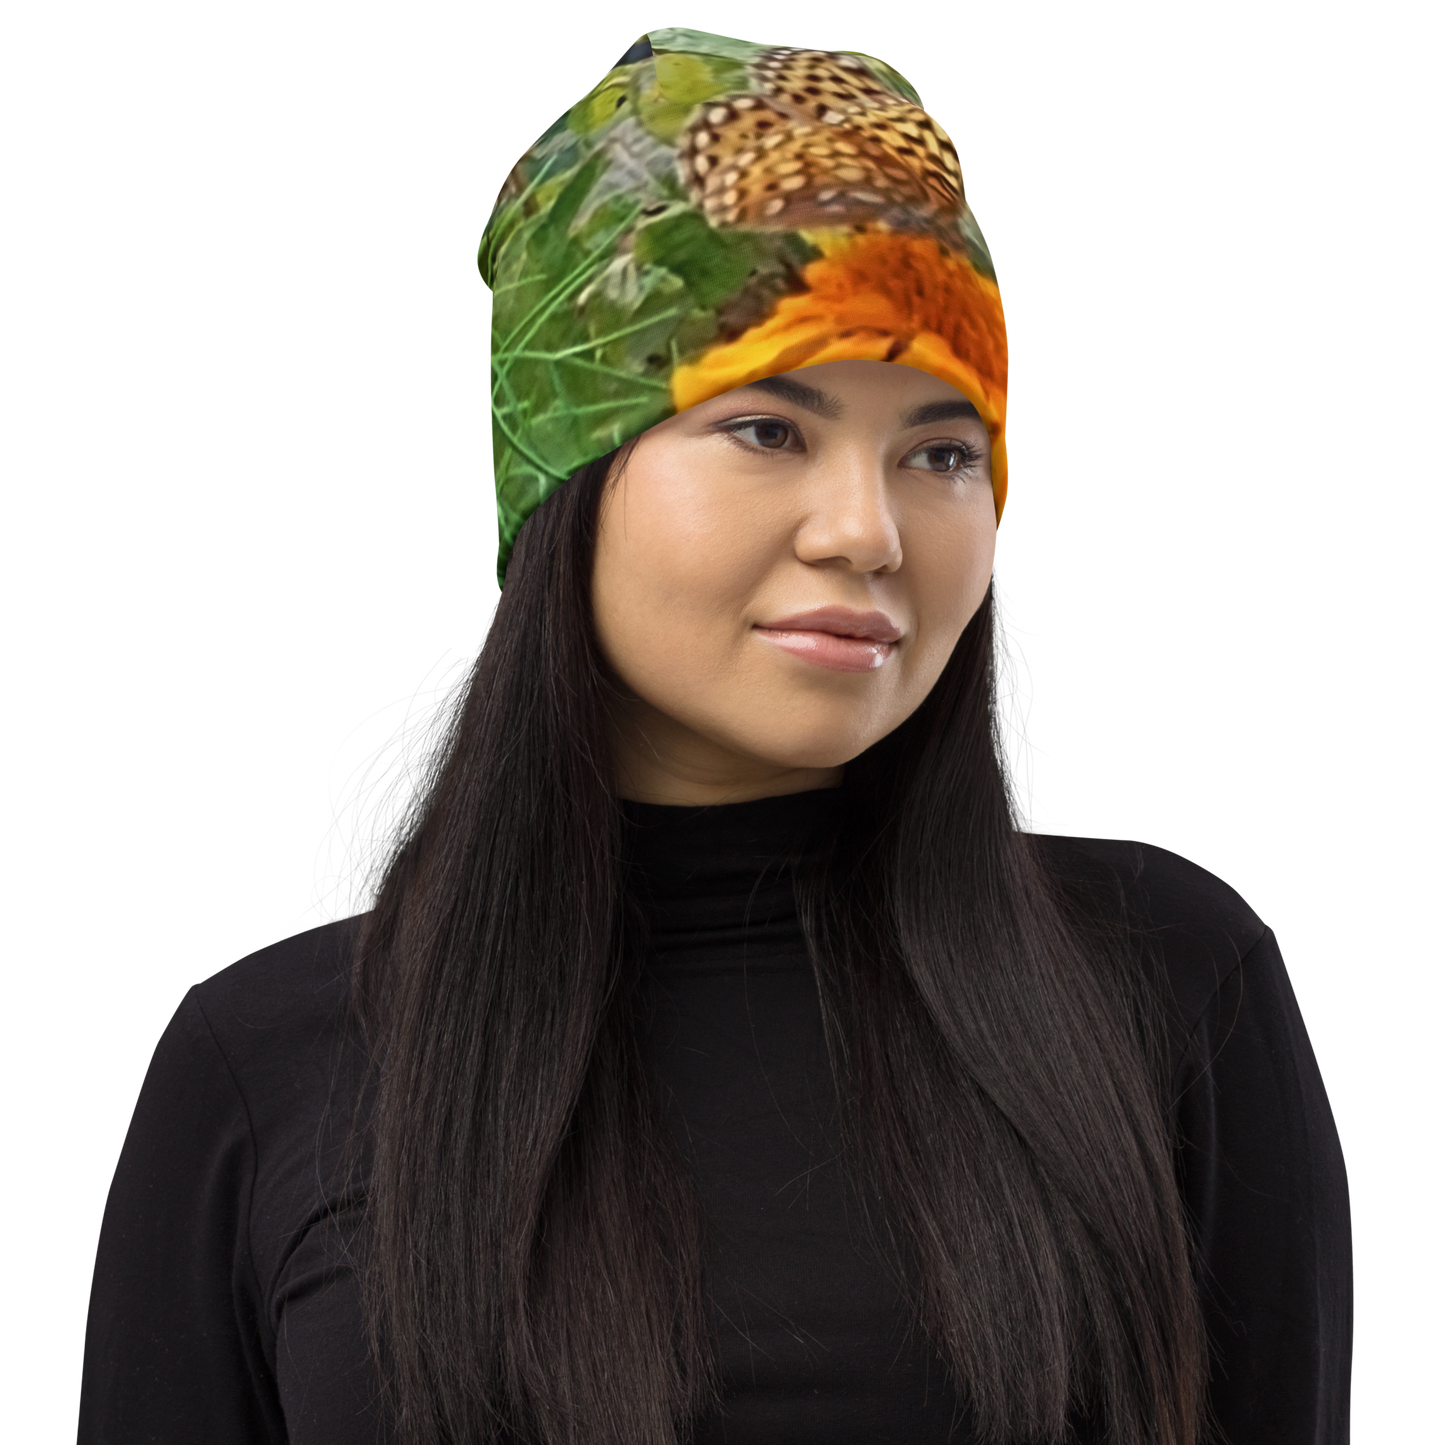 The FLOWER LOVE Collection - "Butterfly on a Bloom" Design Beanie - Lightweight, Cute Chemo Hat